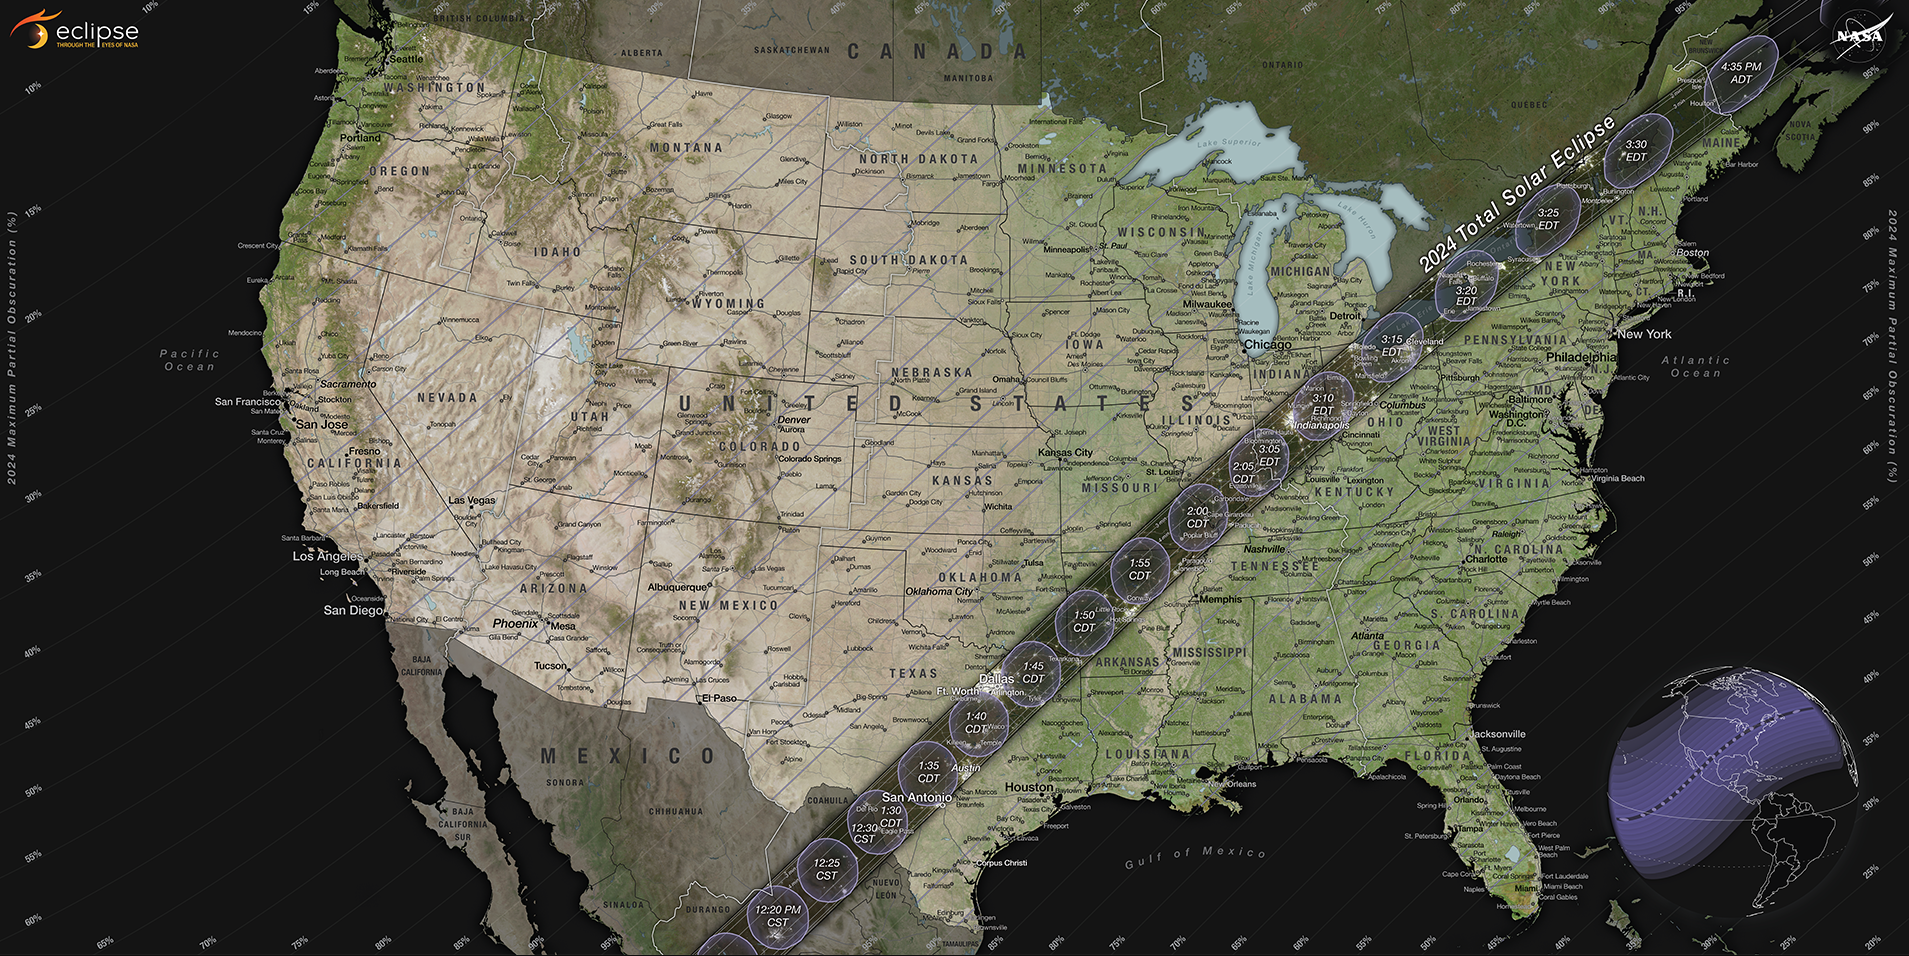 Moon's shadow path over the United States for the April 8, 2024